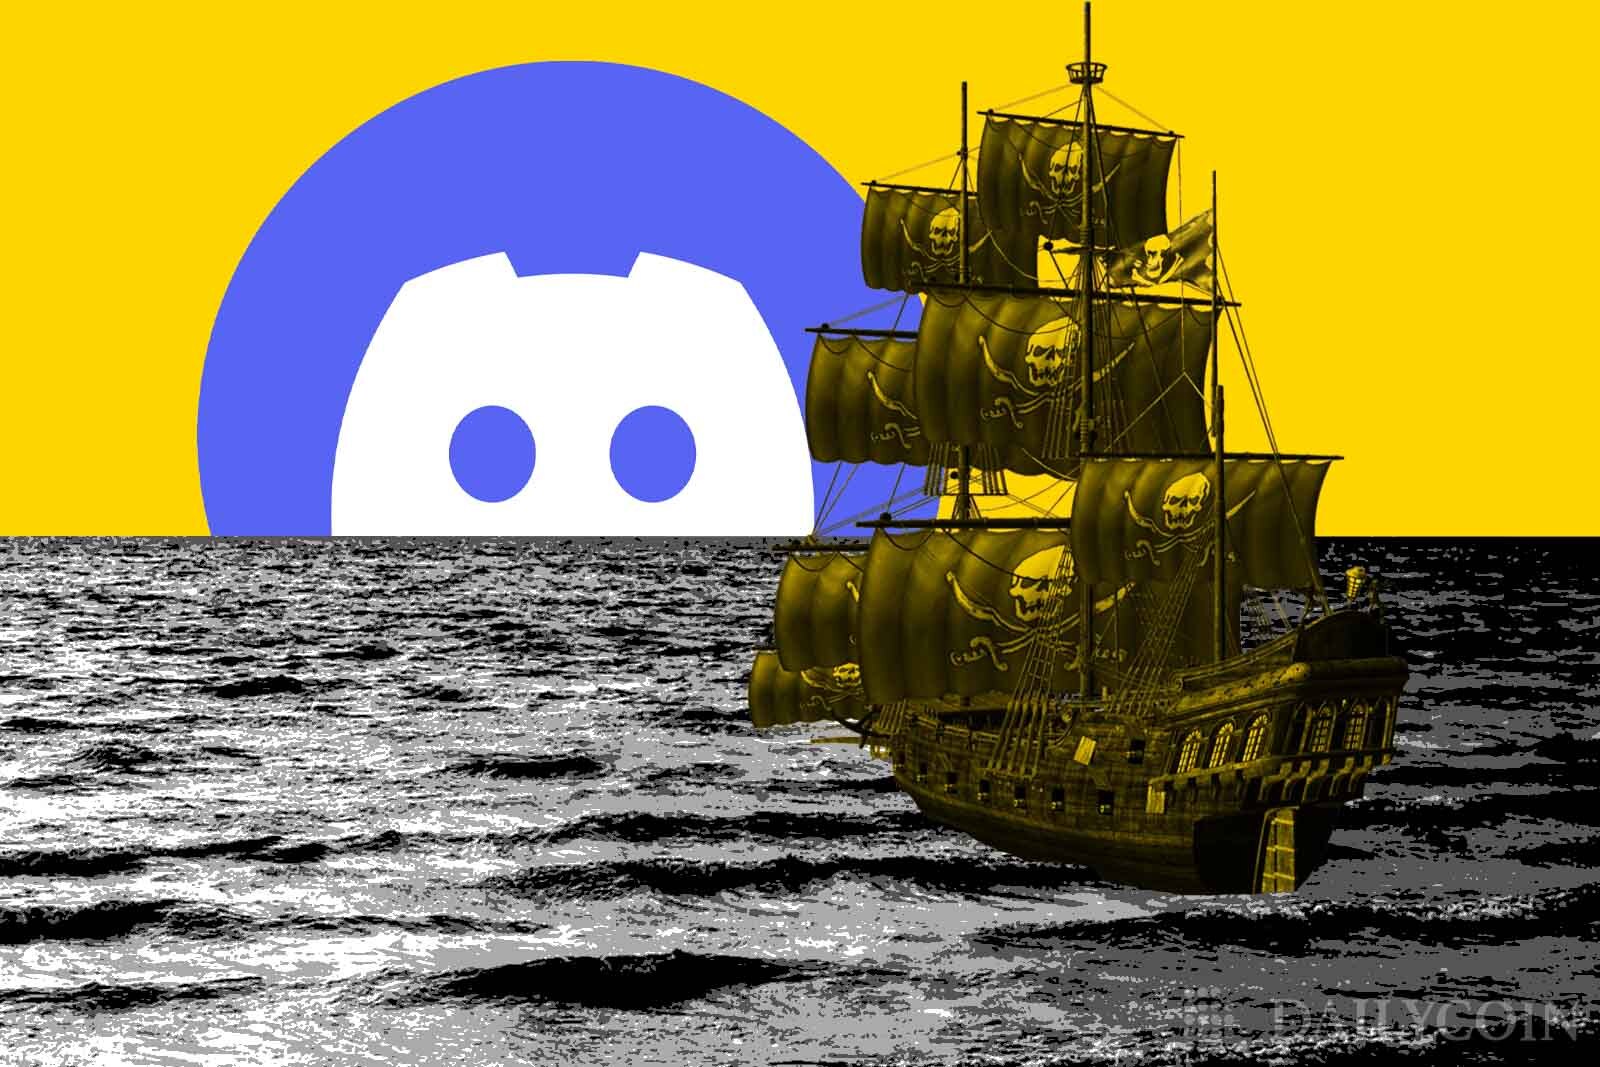 Latest OpenSea Attack Sees Hacker Infiltrate Discord - Crypto Briefing